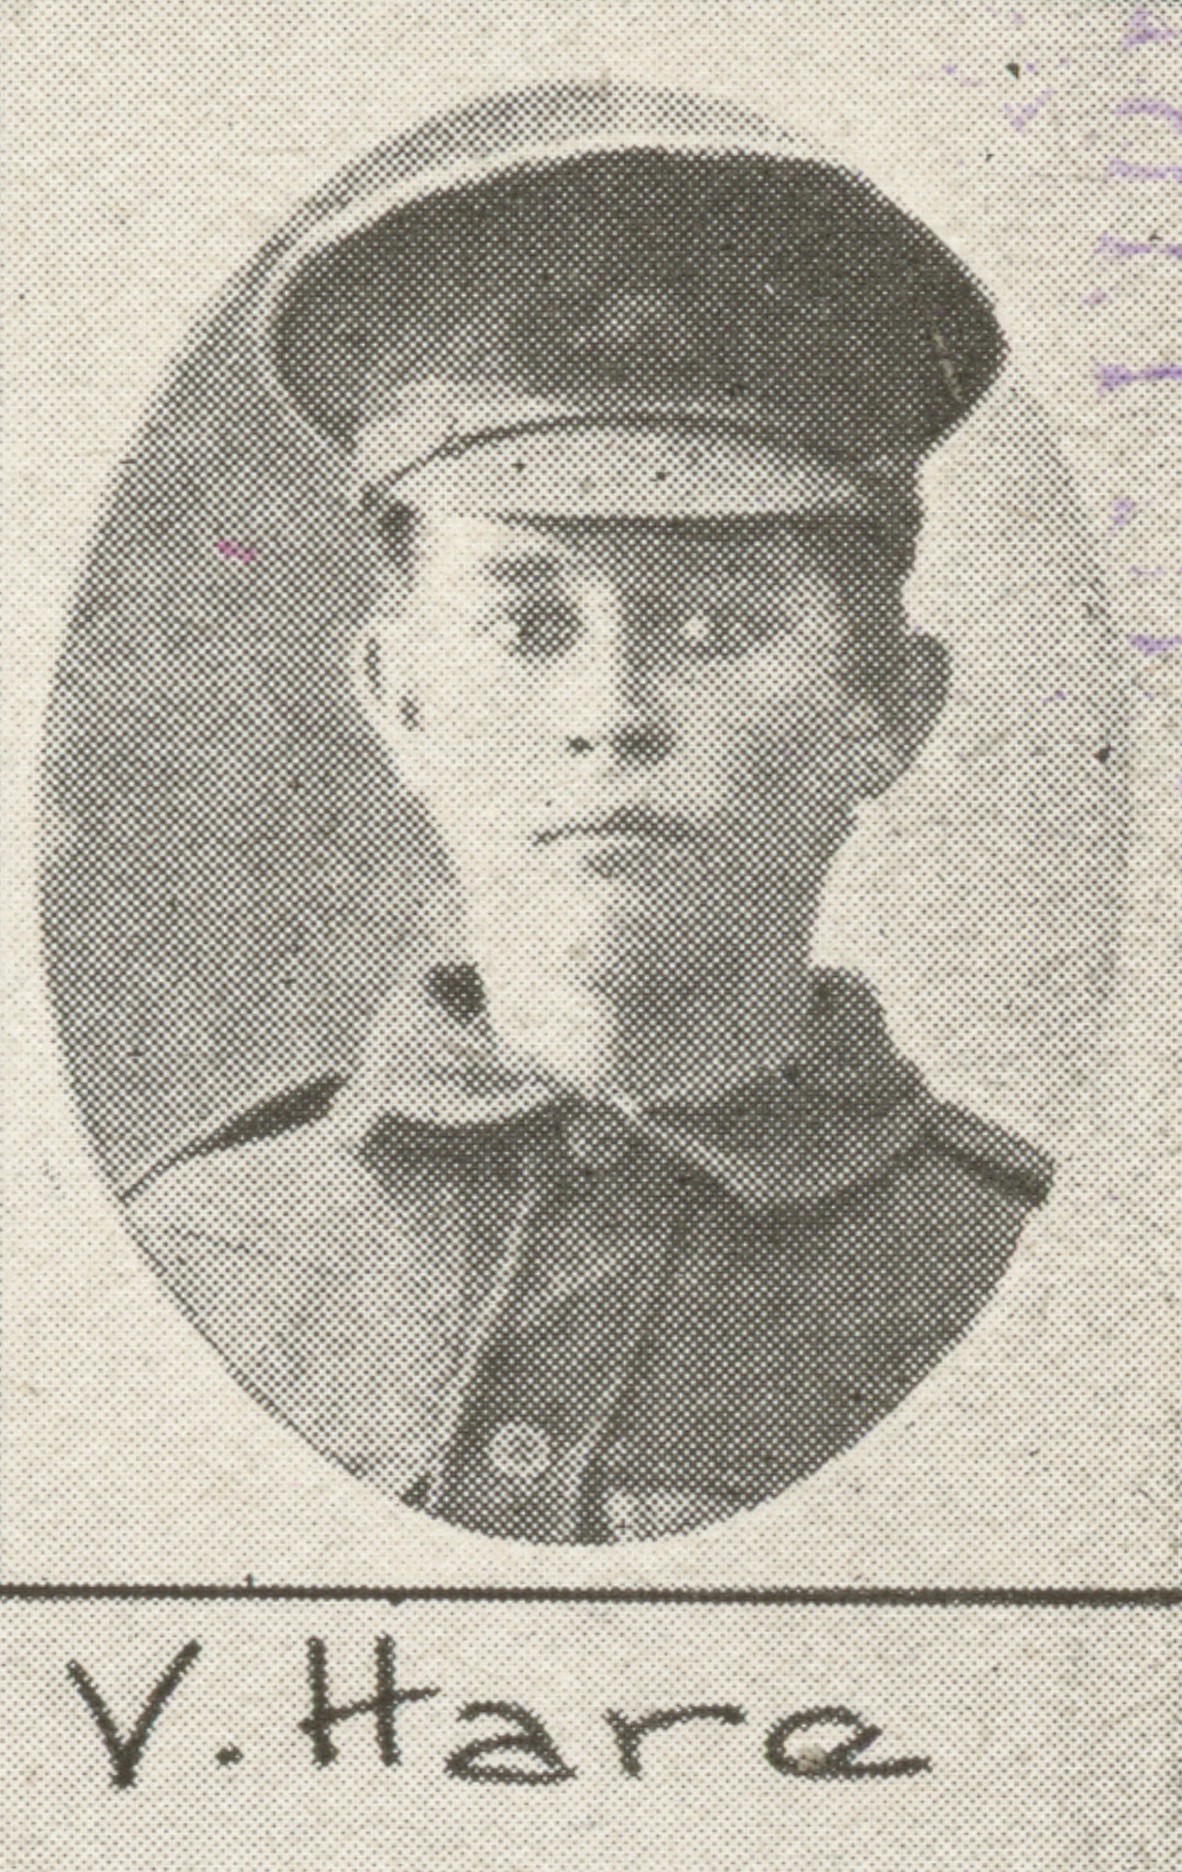 V. Hare one of the soldiers photographed in The Queenslander Pictorial supplement to The Queenslander 1917.